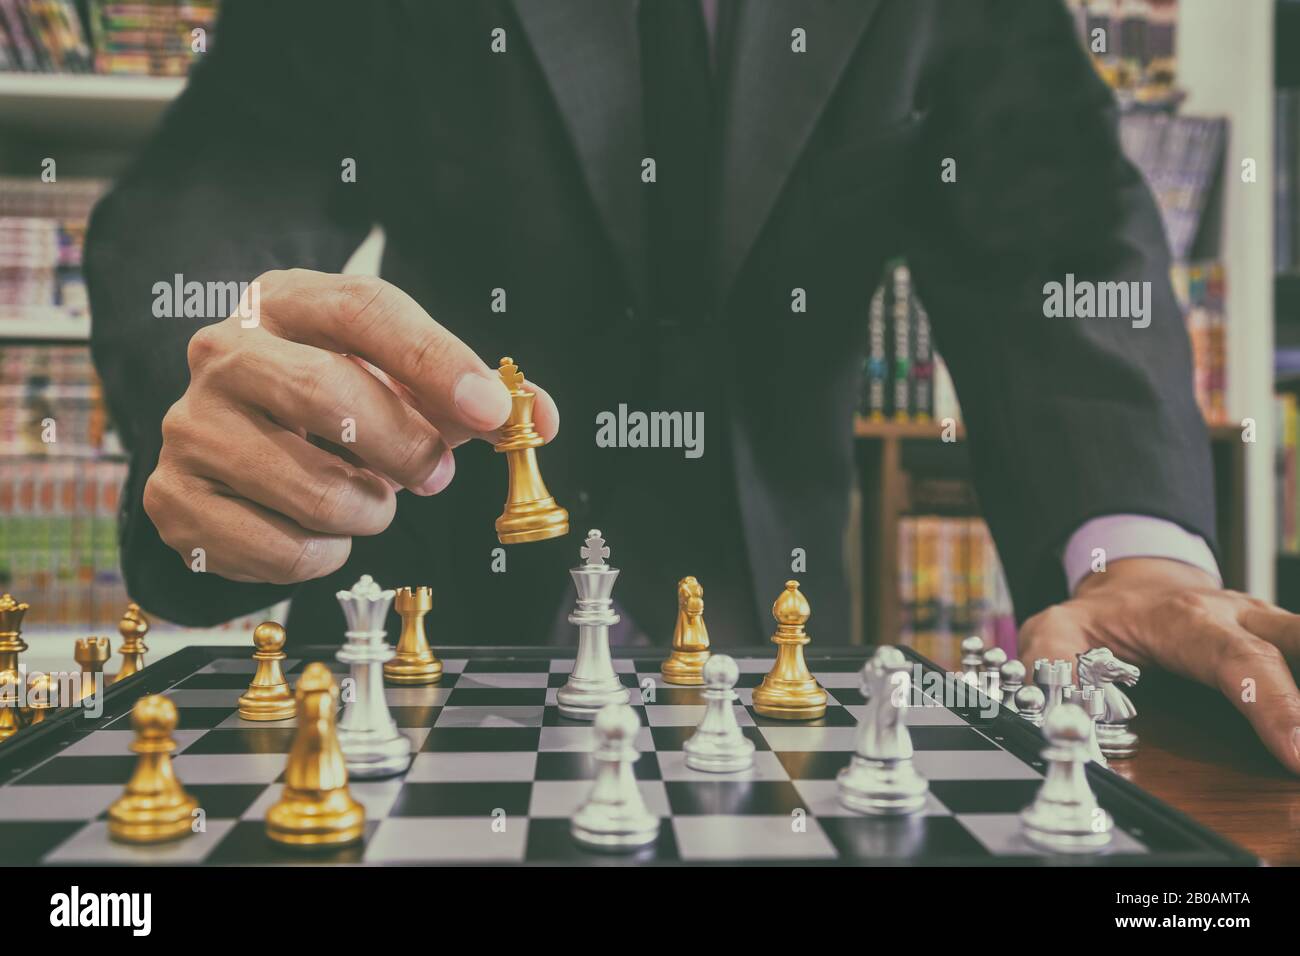 Businessman Playing Chess Board Game For Development Analysis New Strategy  Planningthe Battle Of Competition And Strategy Ideas With Market Mechanism  Stock Photo - Download Image Now - iStock